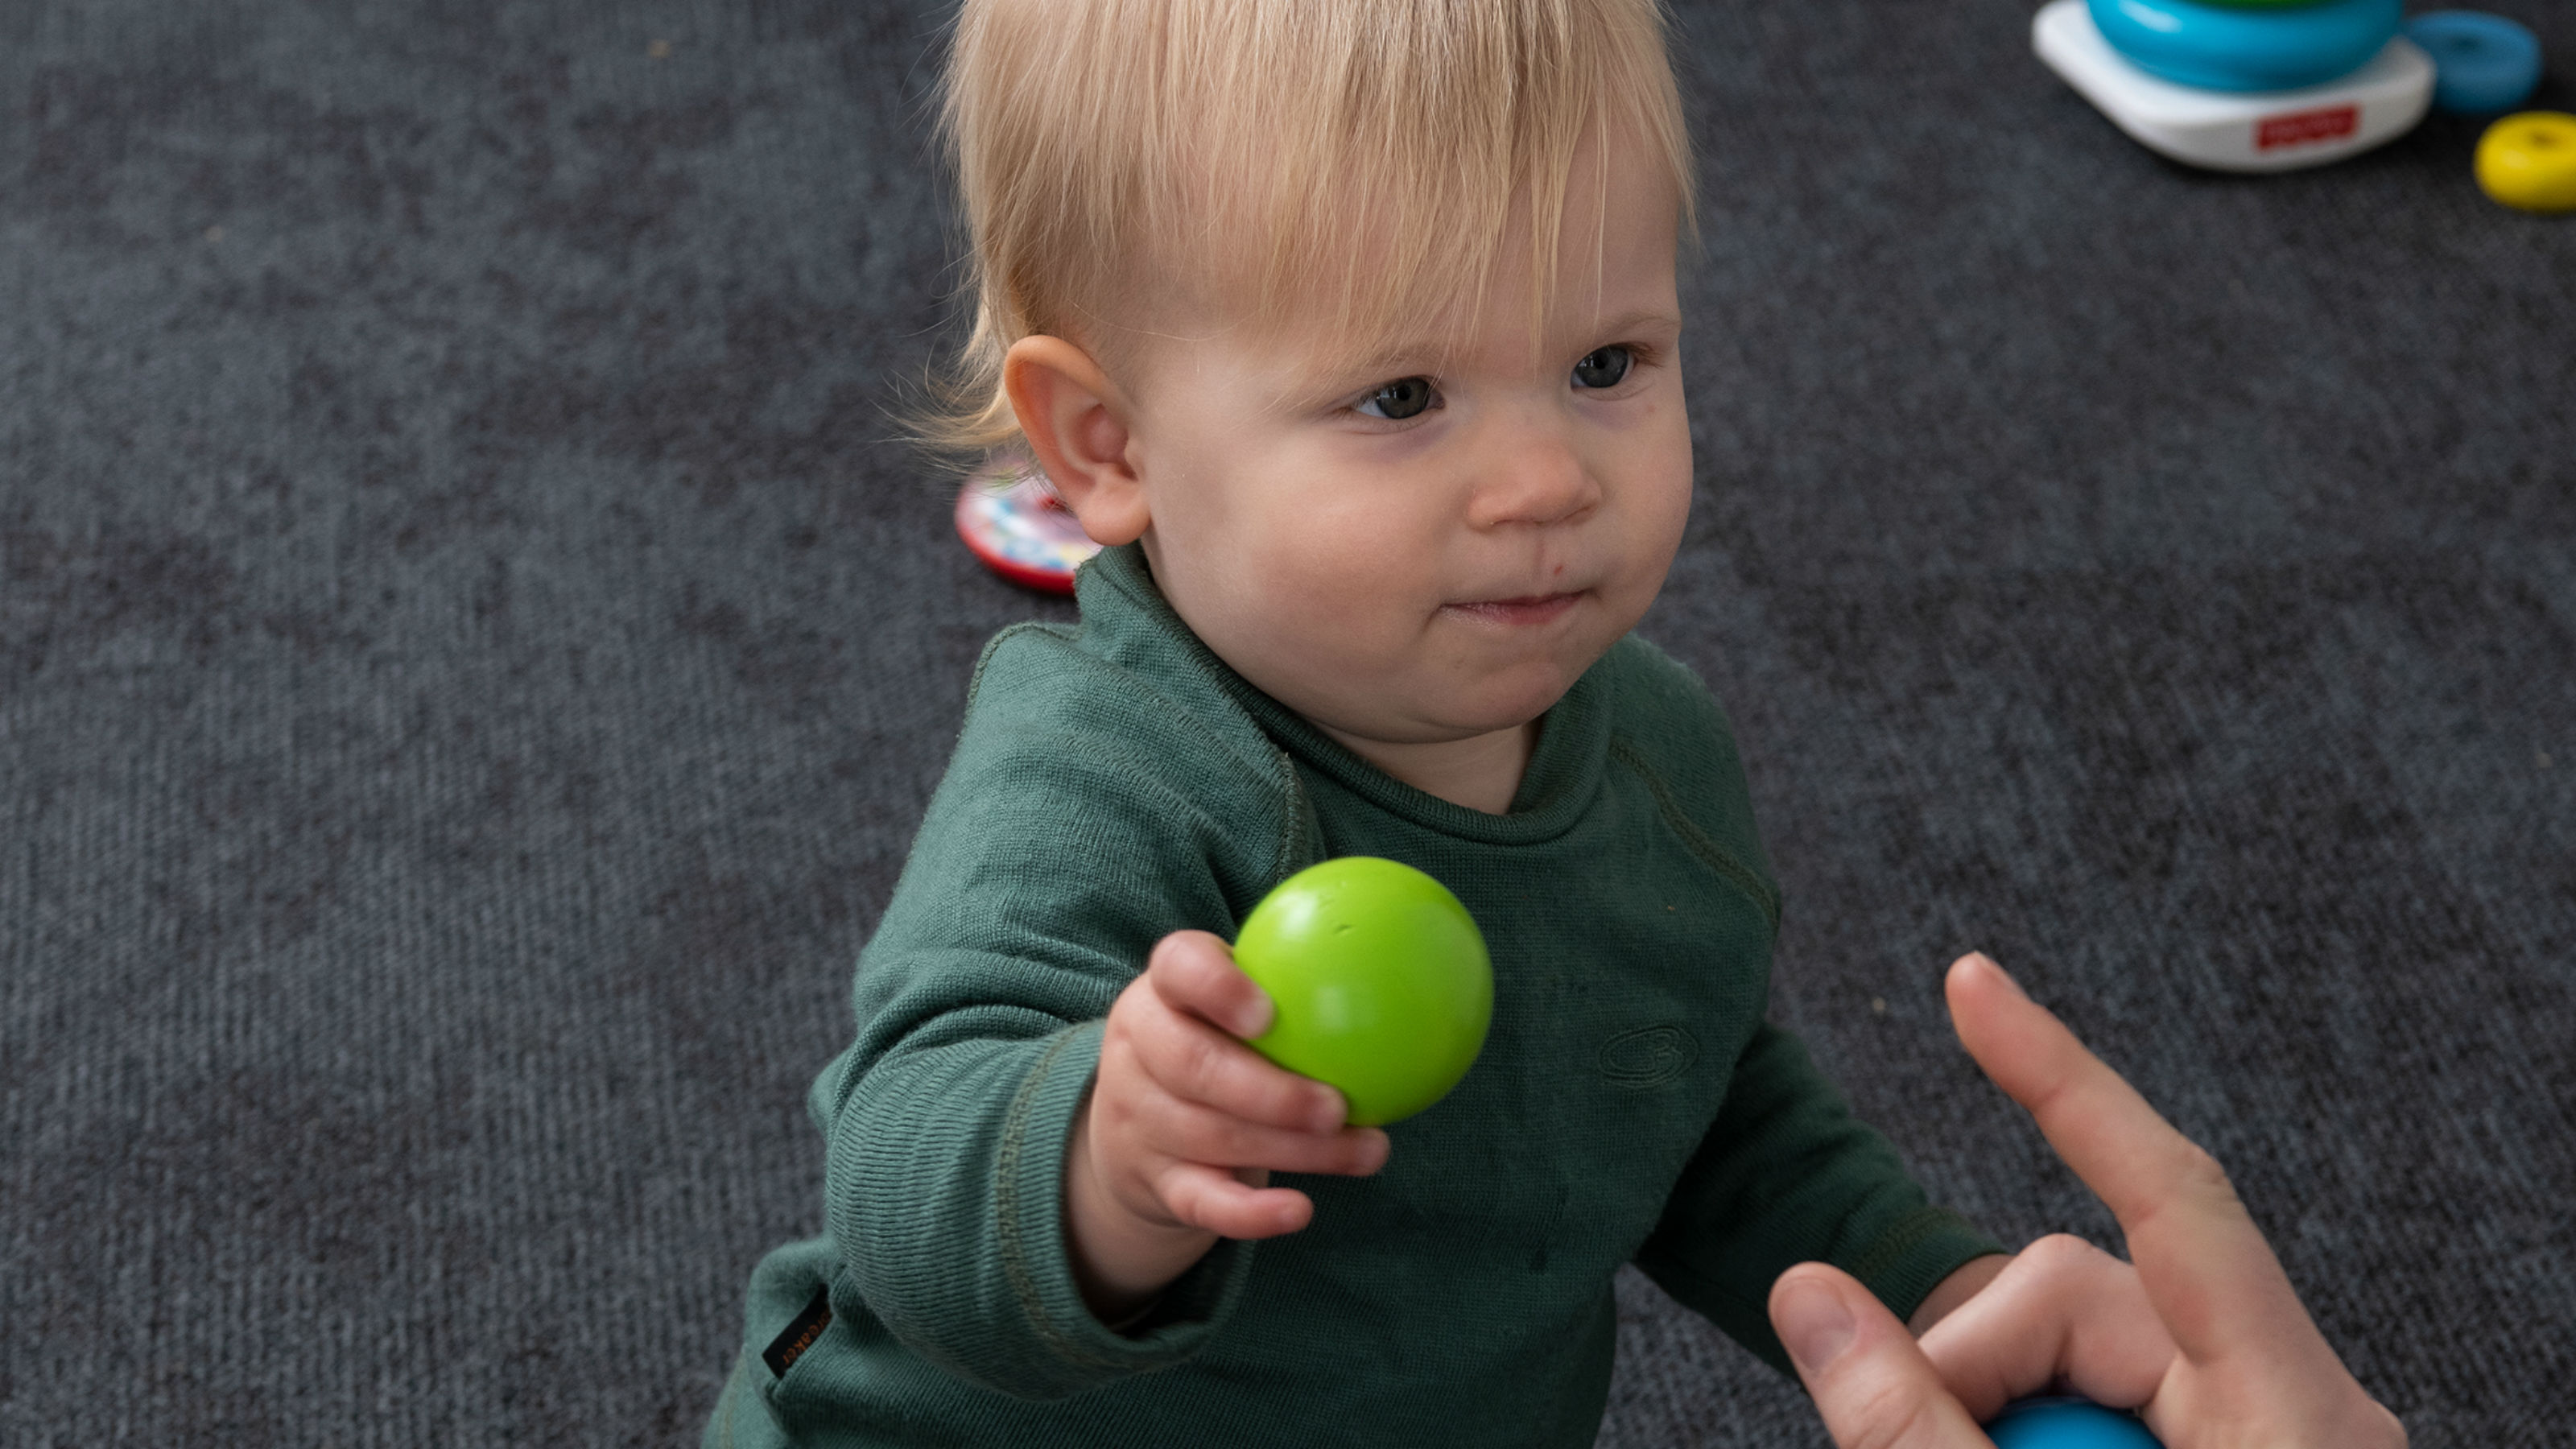 A child passes a green toy ball to an insturctor